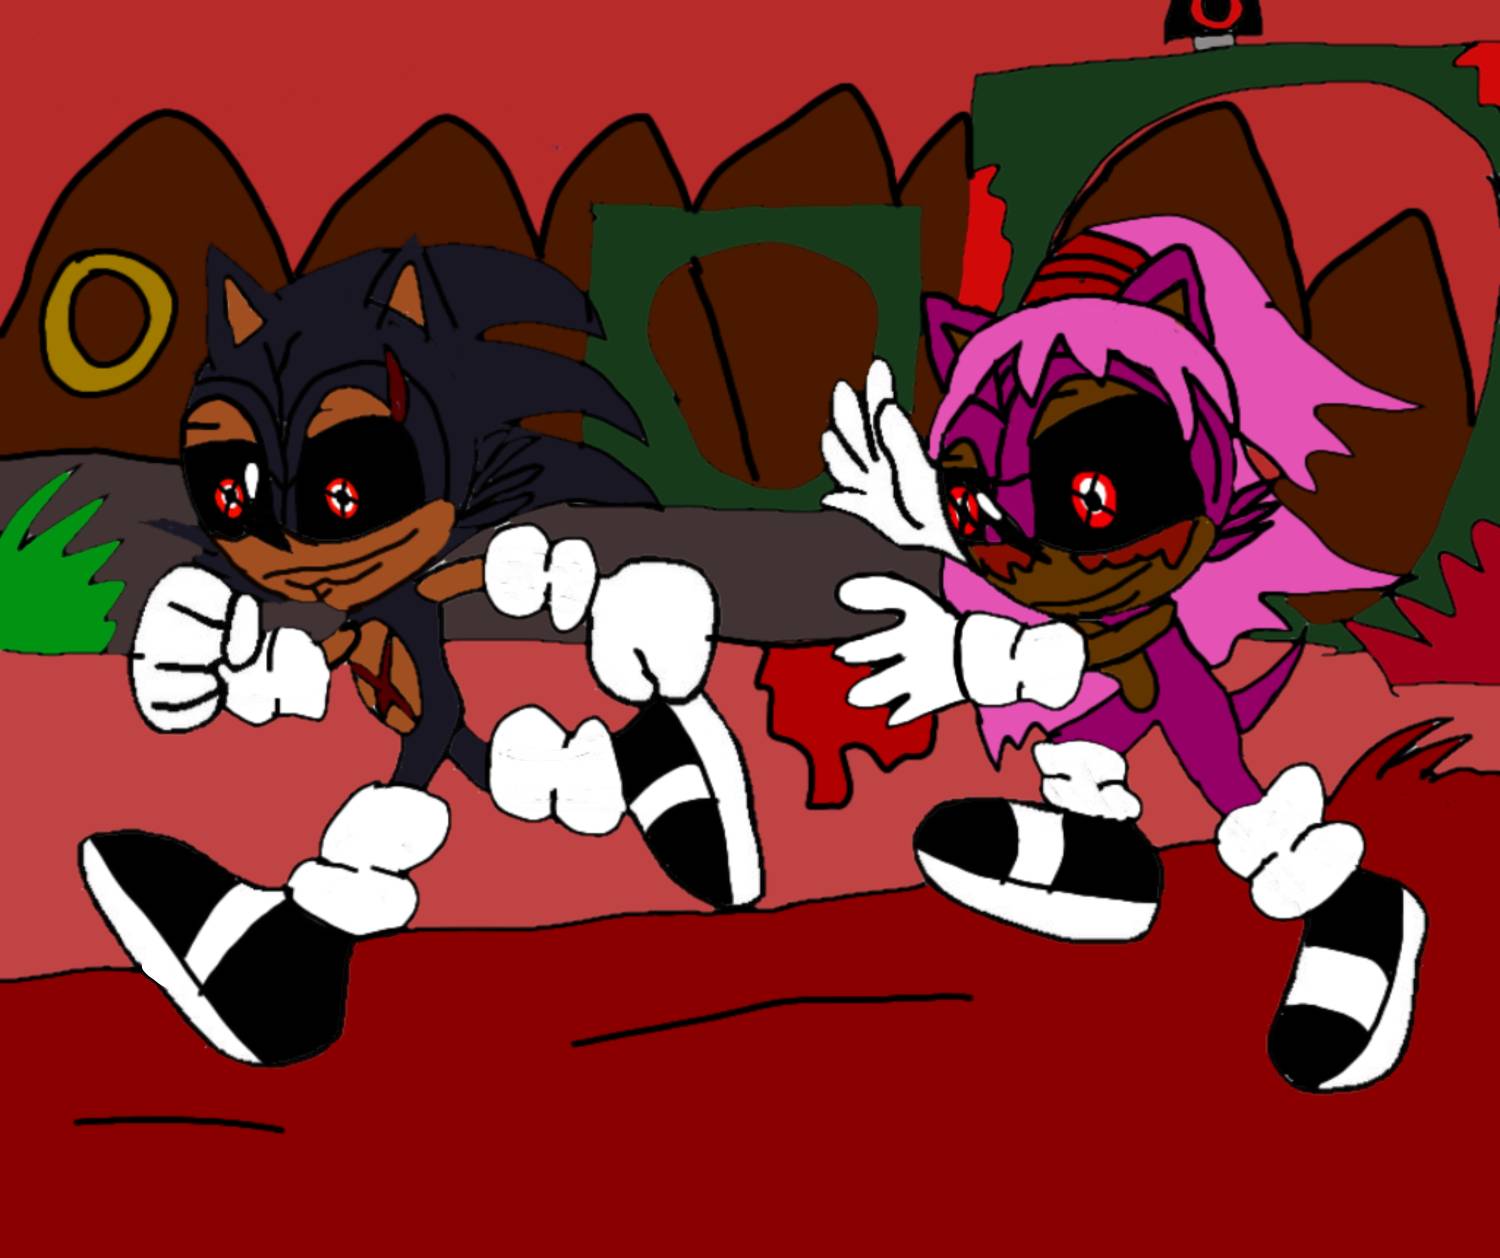 lord x  Sonic art, Bad fan art, Sonic and amy